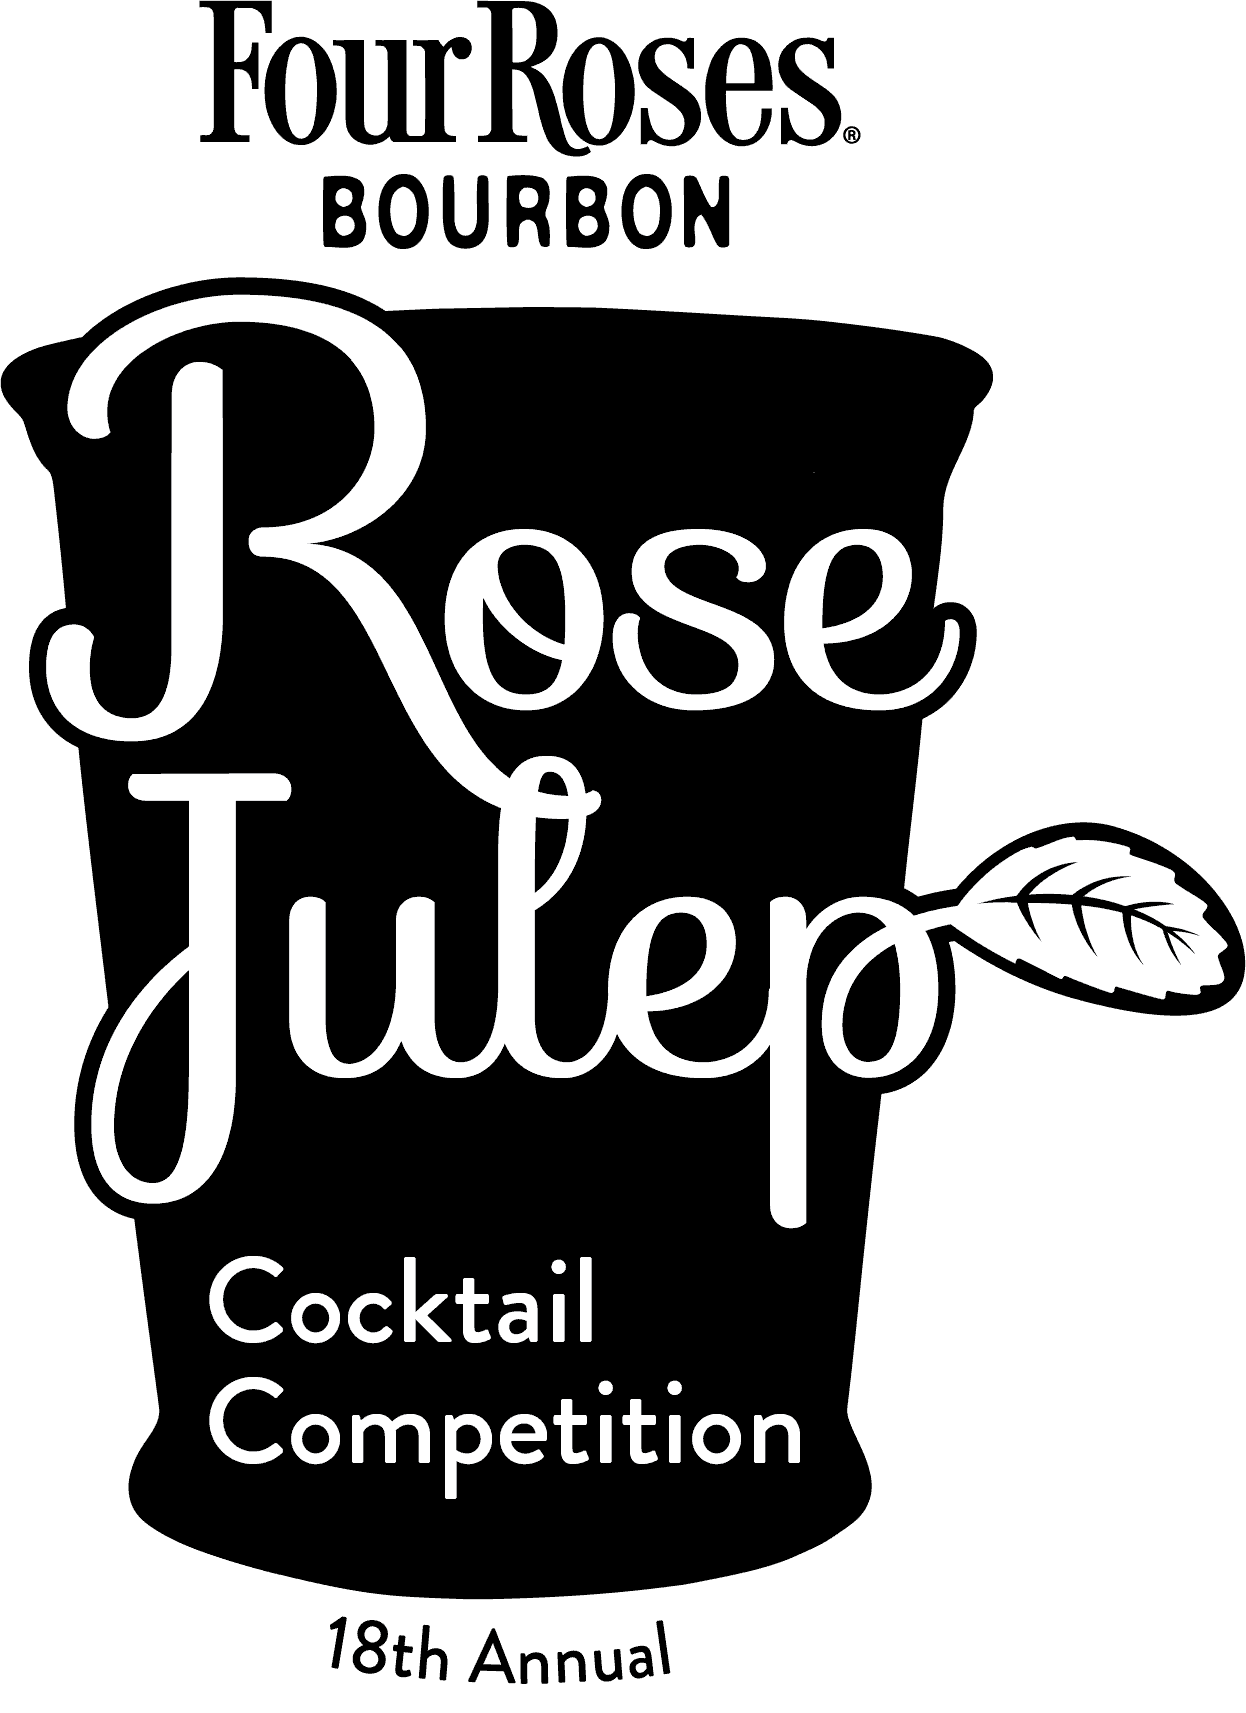 RoseJulep Logo - Four Roses Partners with Kentucky Derby Festival for 18th Annual ‘Rose Julep’ Cocktail Competition